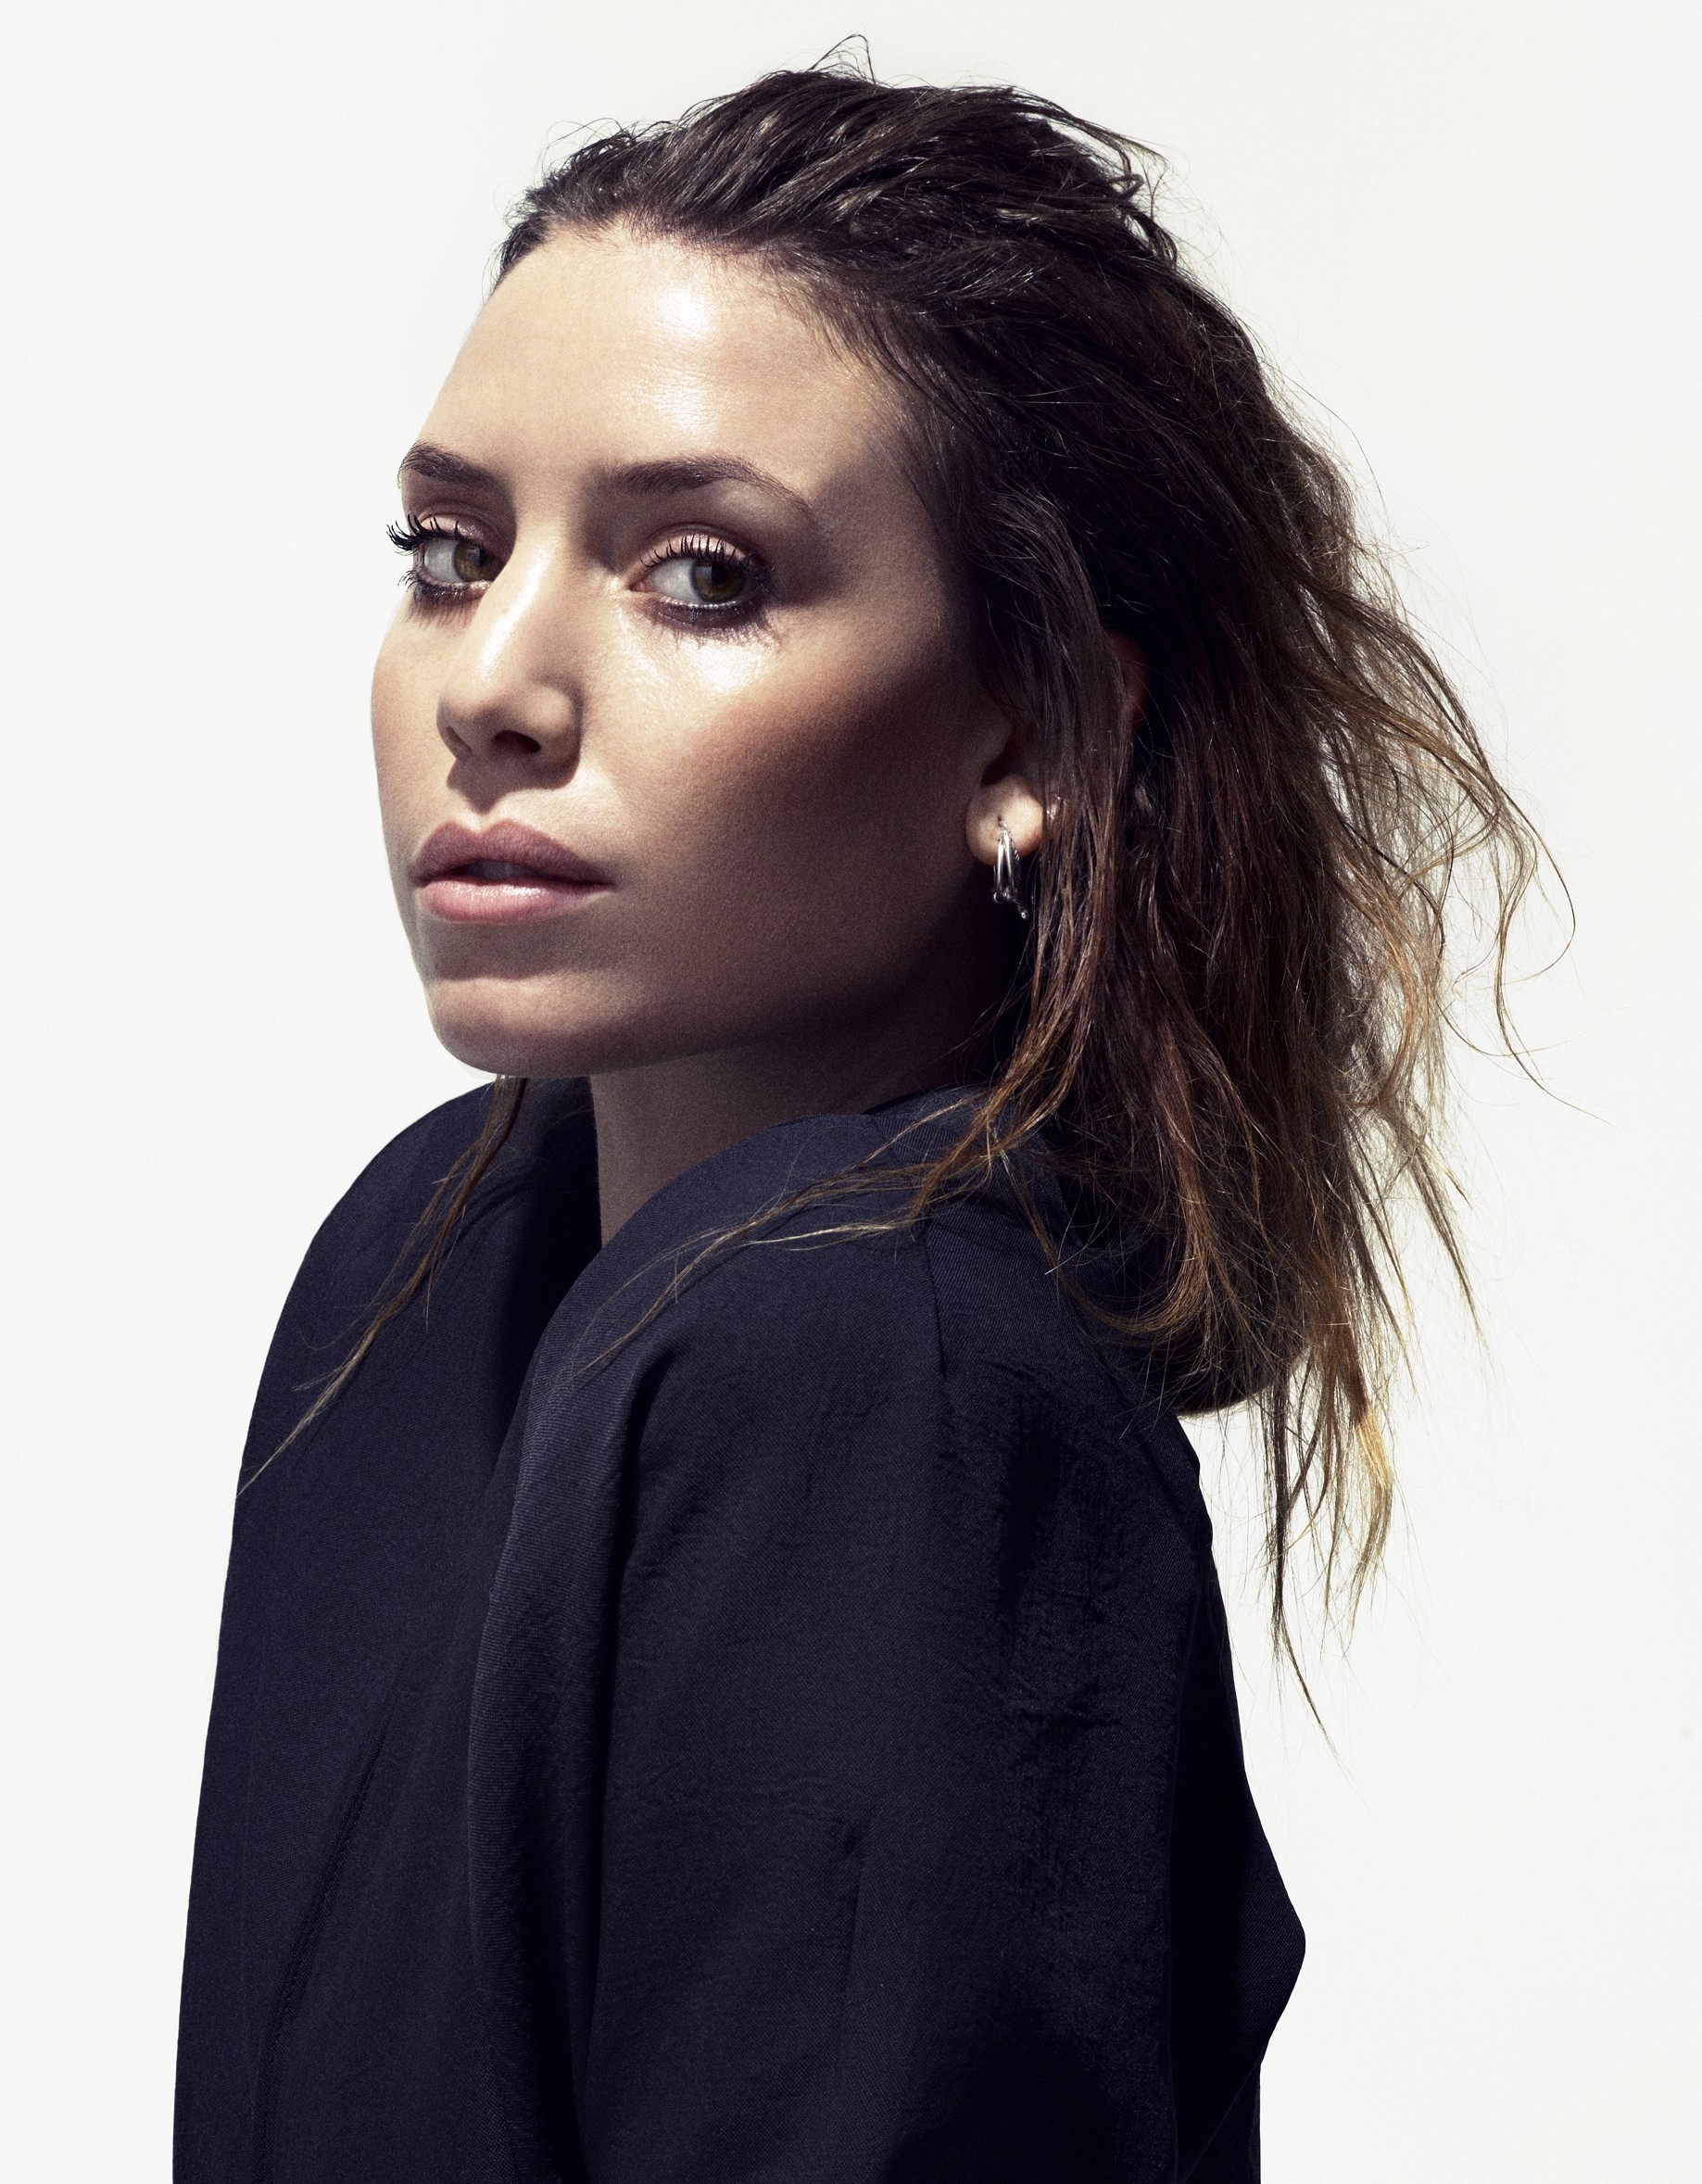 Lykke Li - bio and intersting facts about personal life.